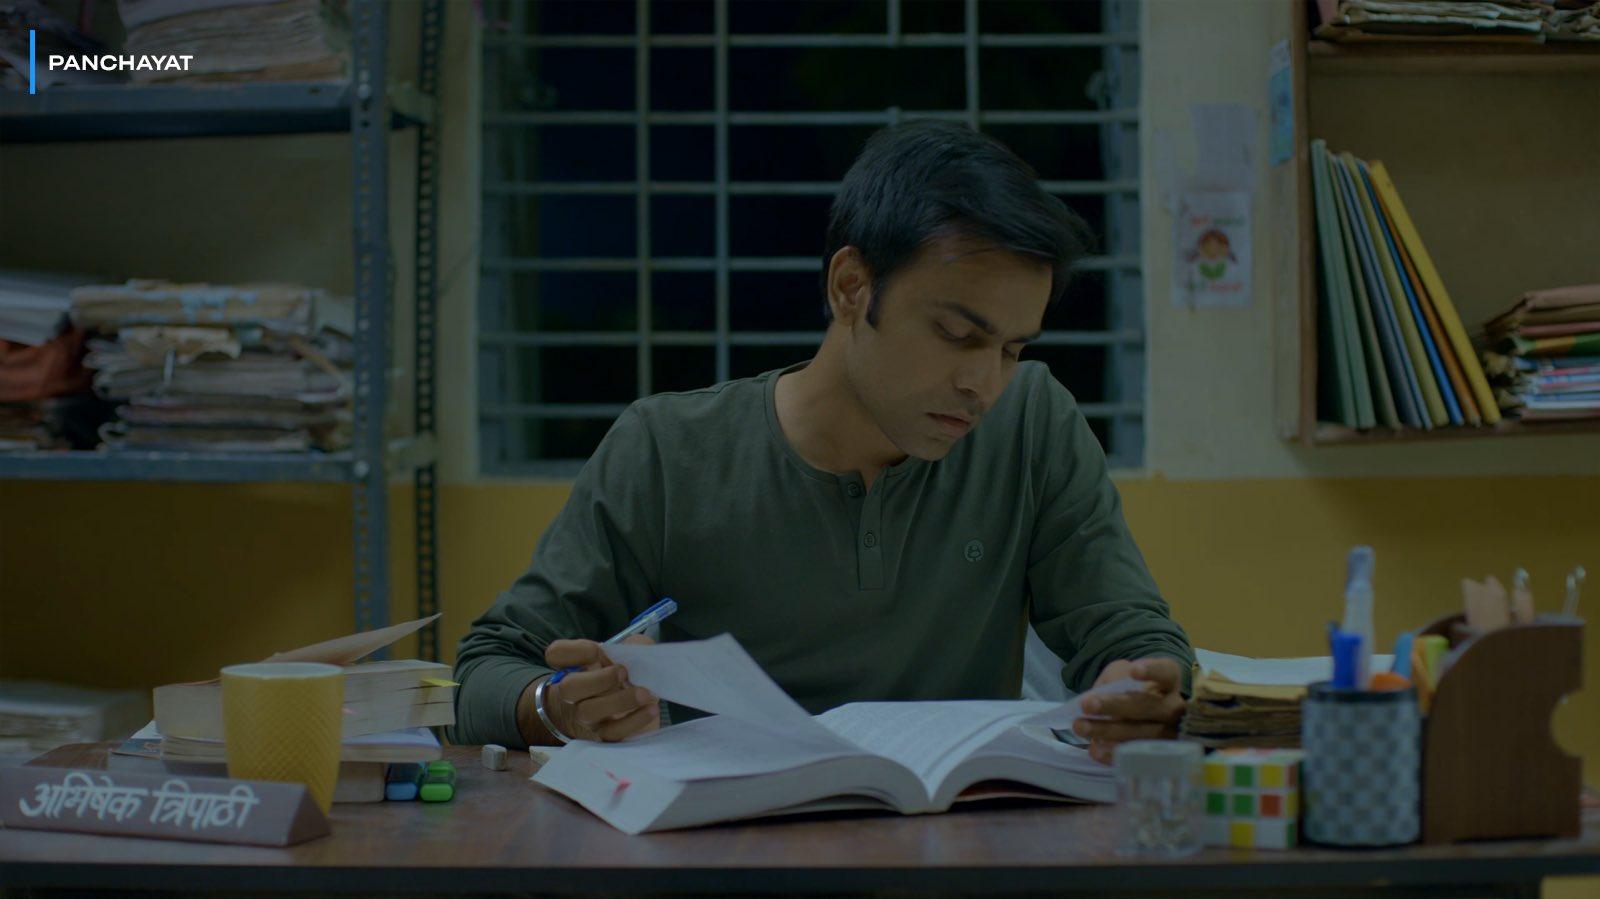 Prime Video In On X Jitendra Kumar Was Preparing For Upsc A Day